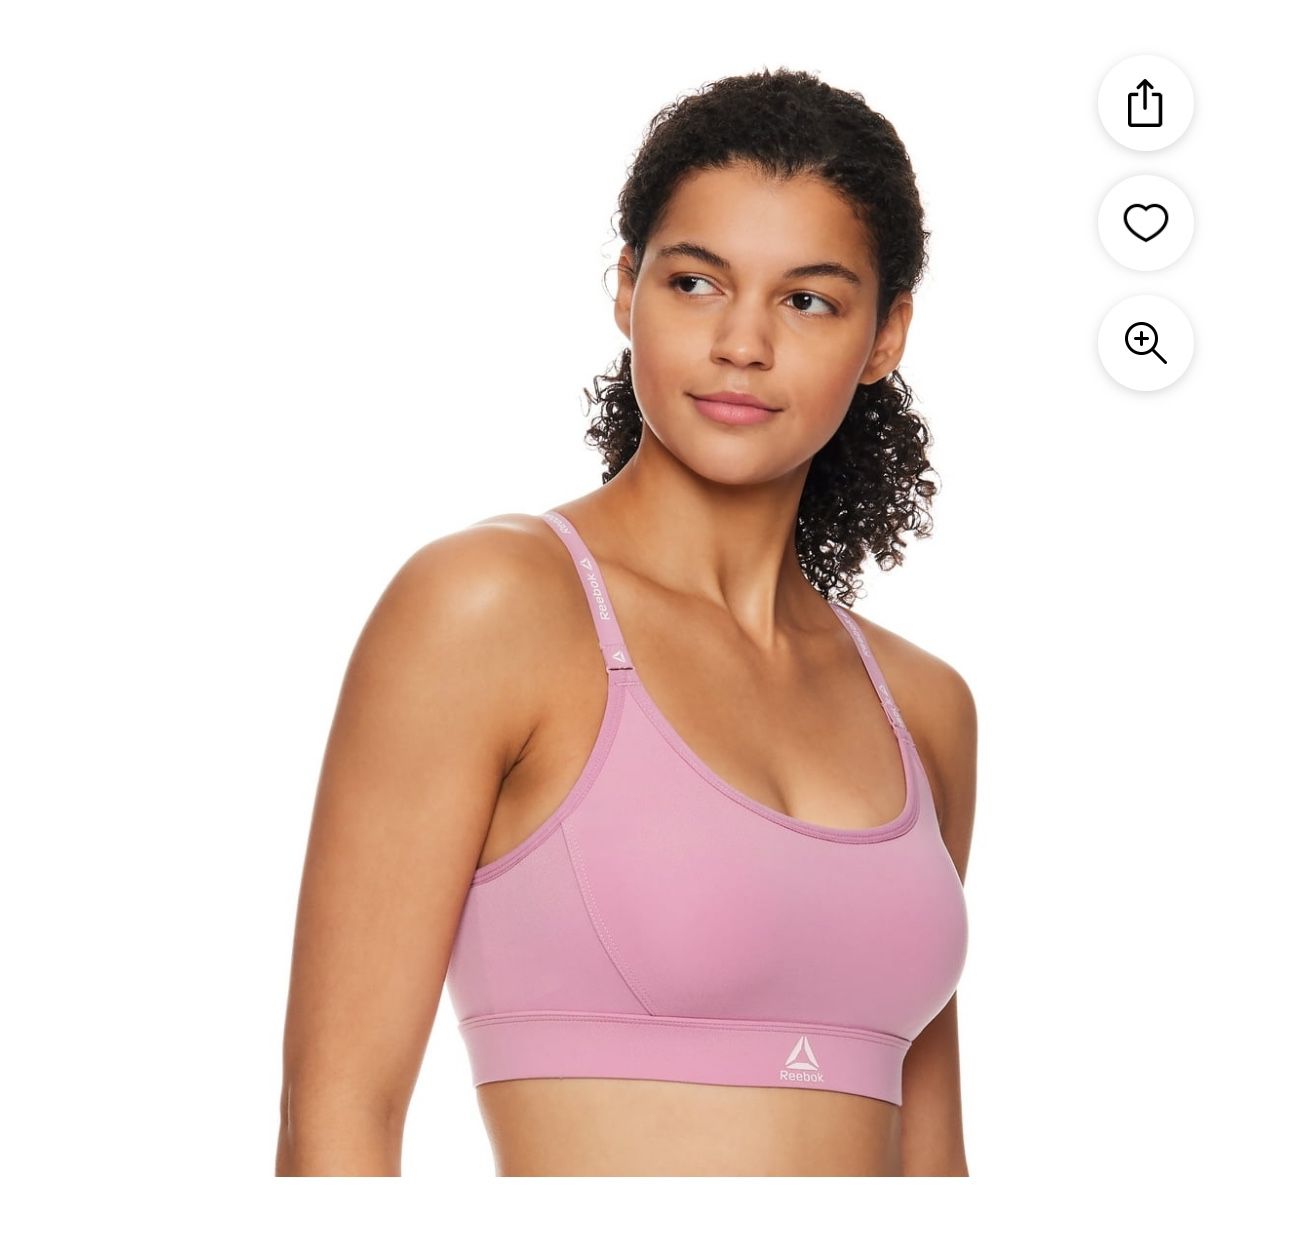 Reebok Women's Low Impact Favorite Bra with Removable Cups, Size L $6.00